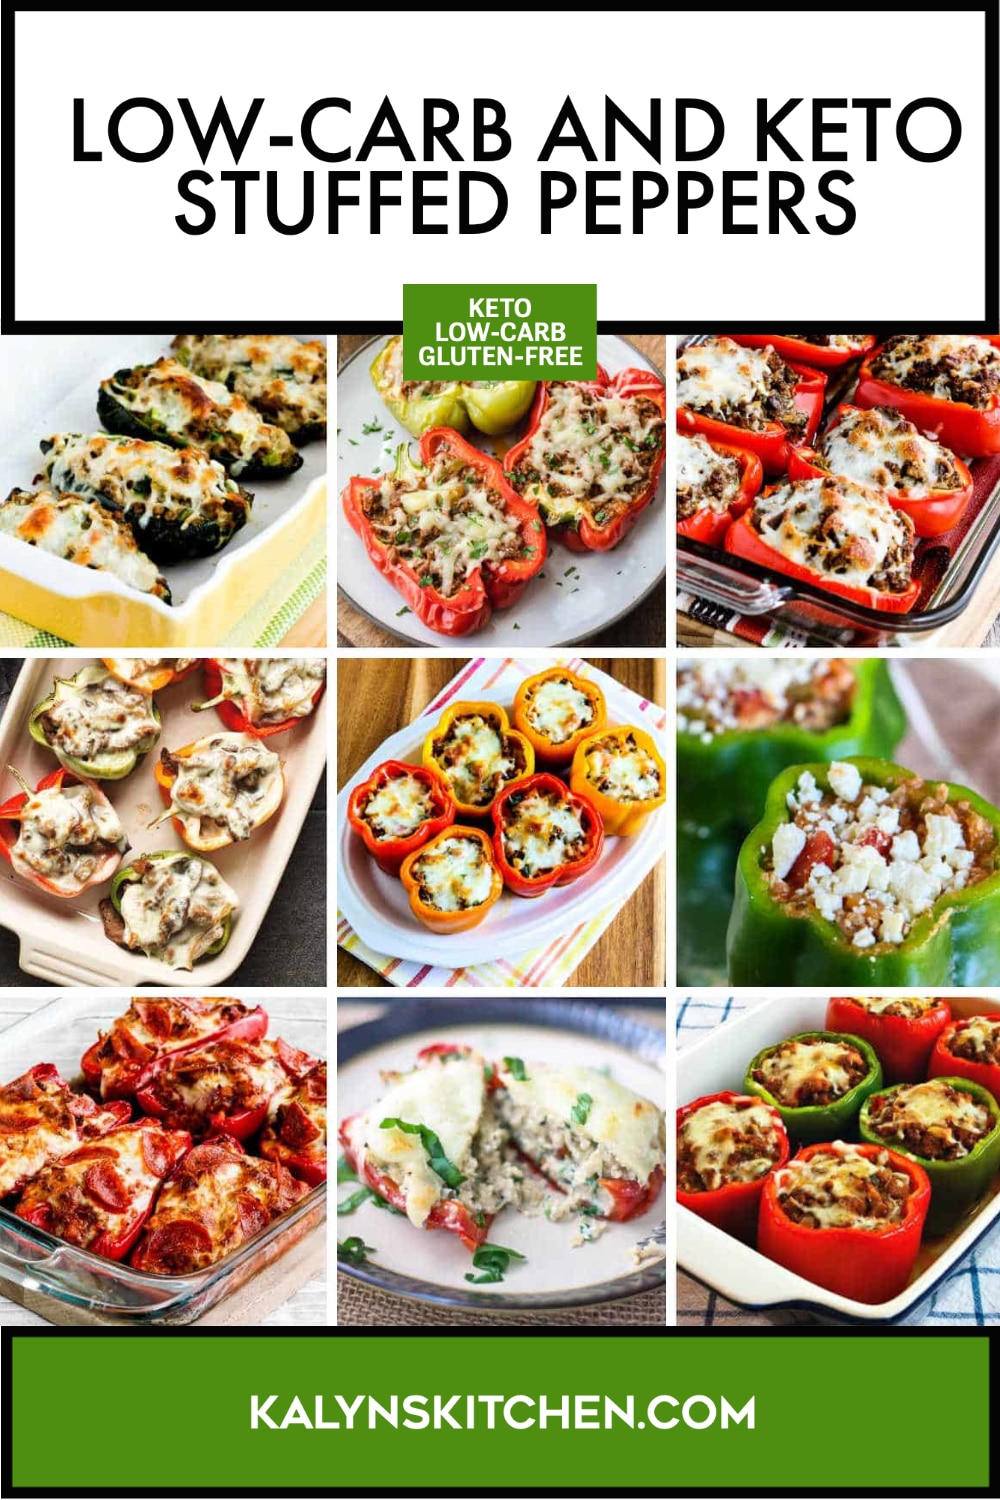 Pinterest image of Low-Carb and Keto Stuffed Peppers